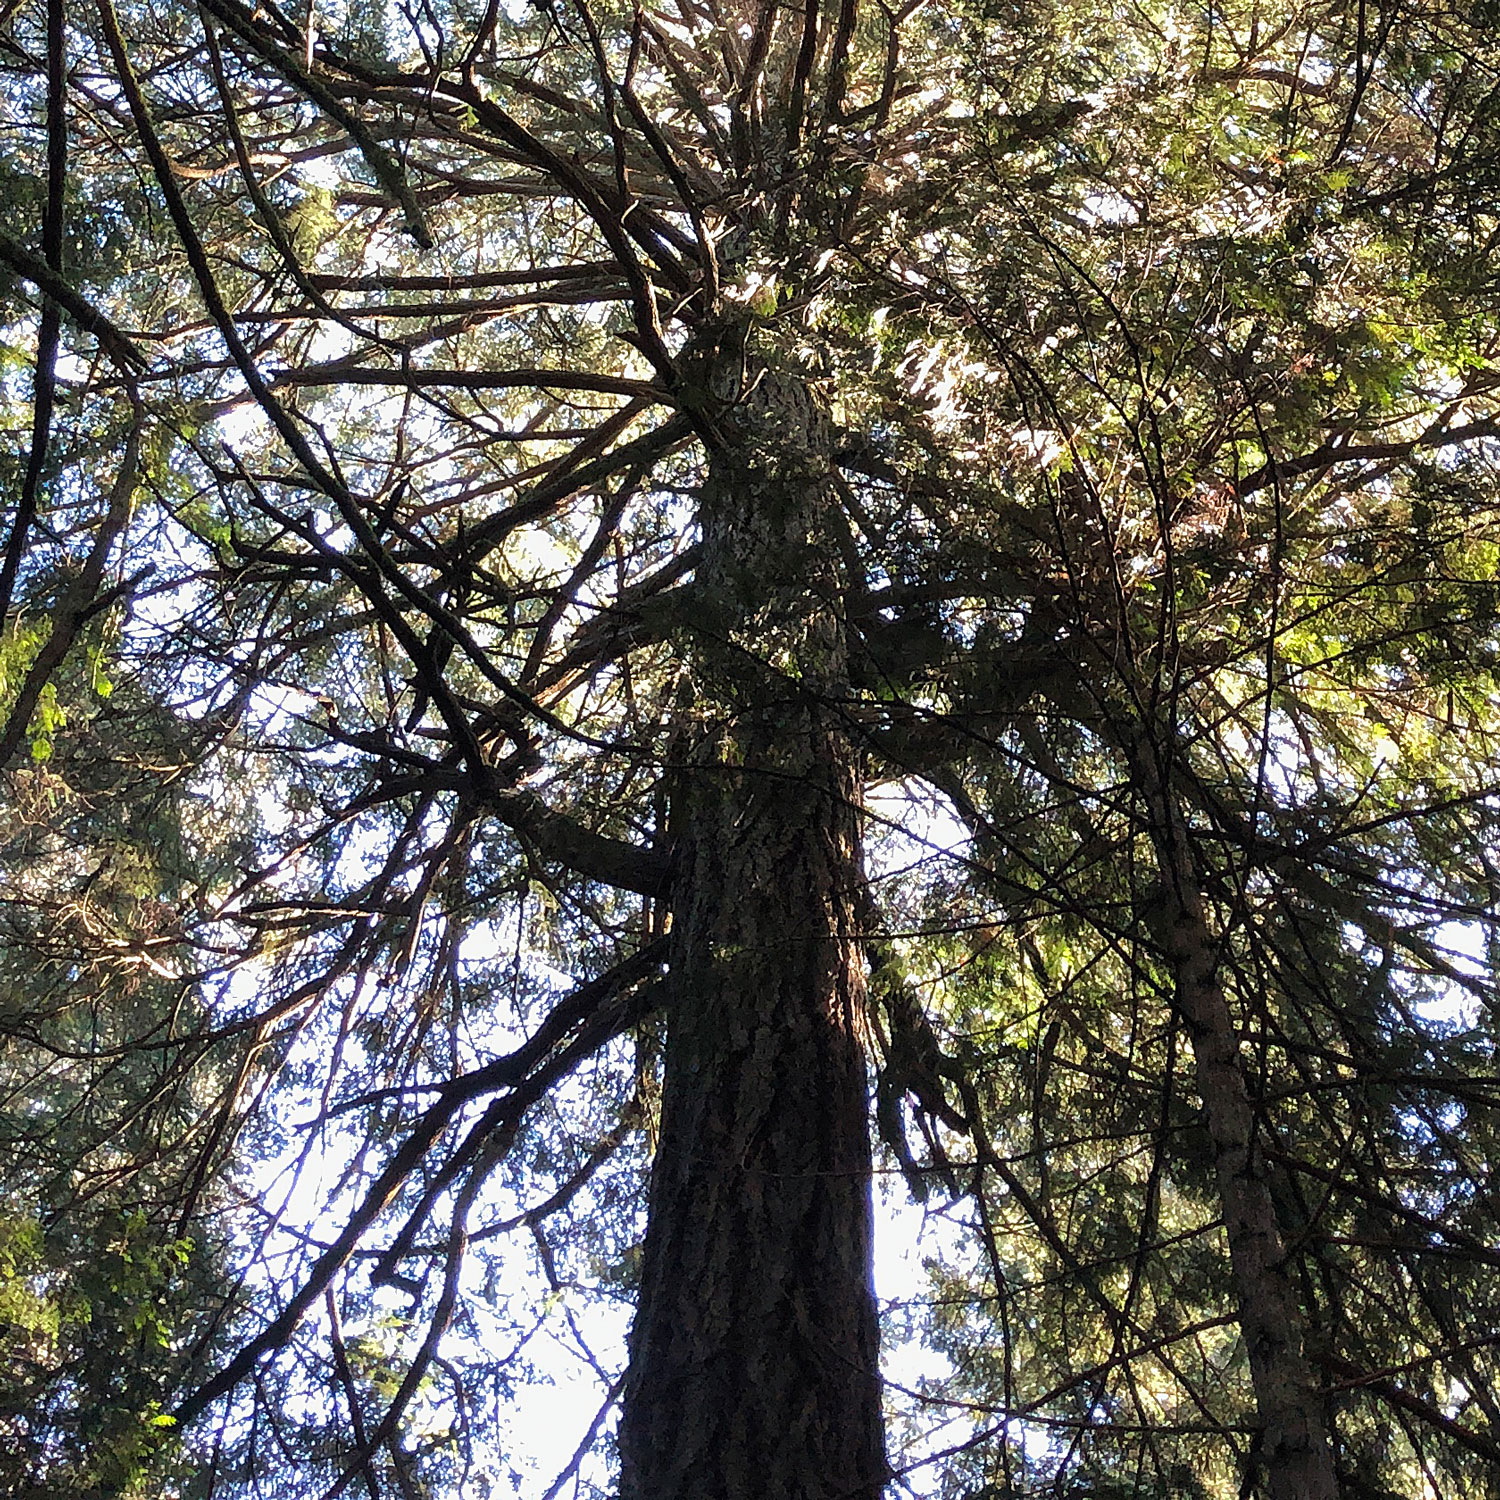 Looking up at the top of an old Douglas-fir tree.